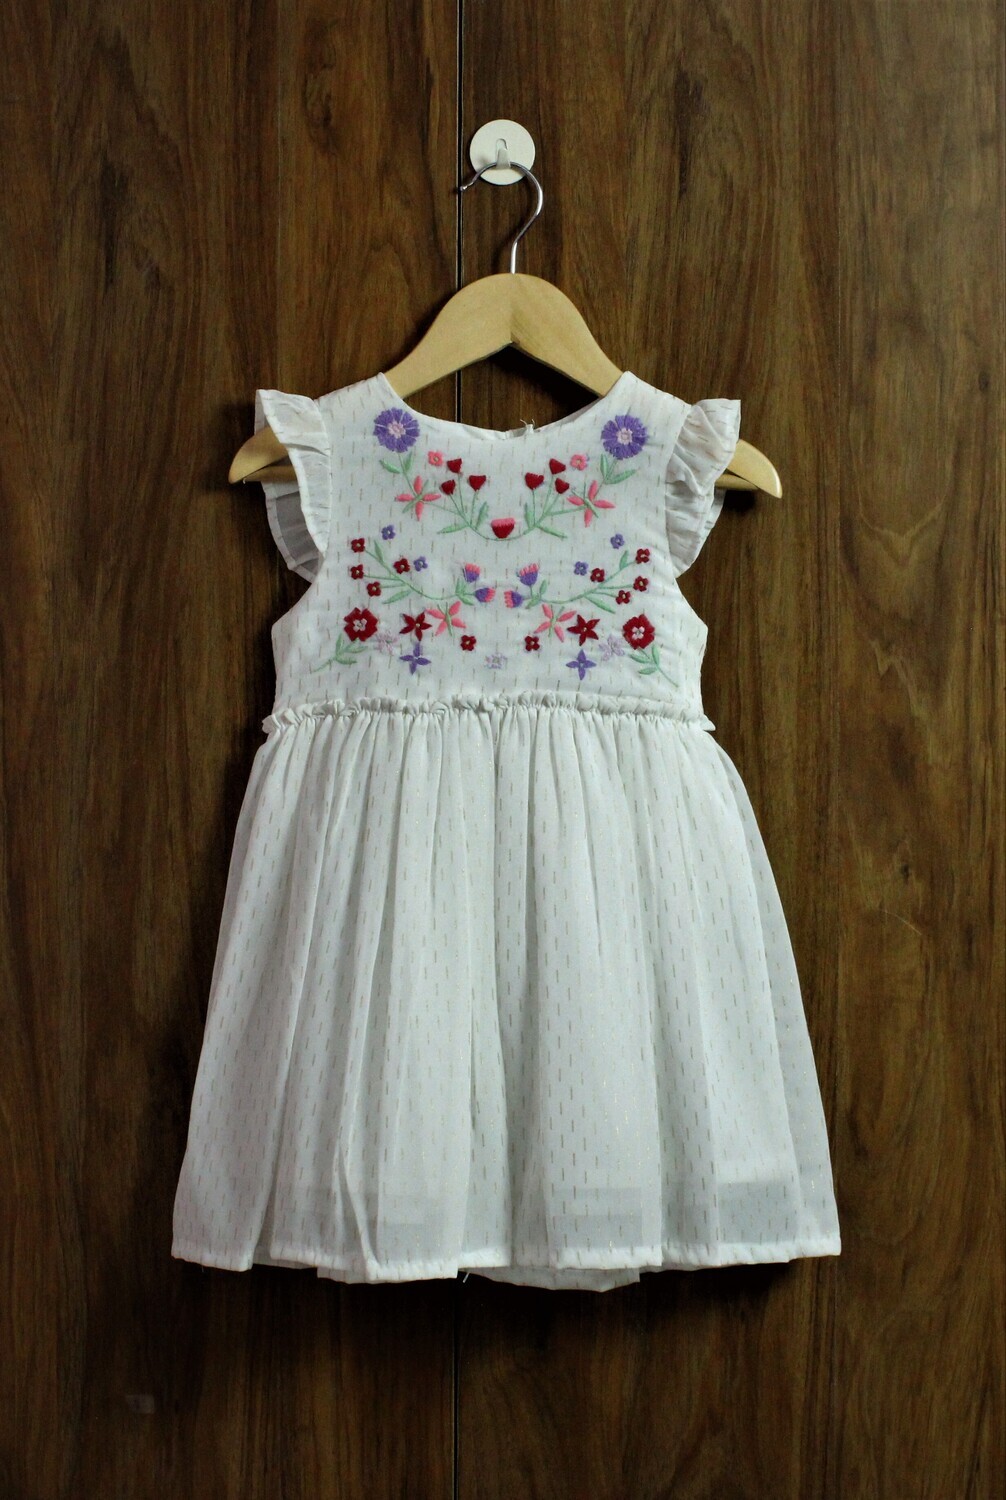 emb classic look dress(1 to 7-8 Yrs.)